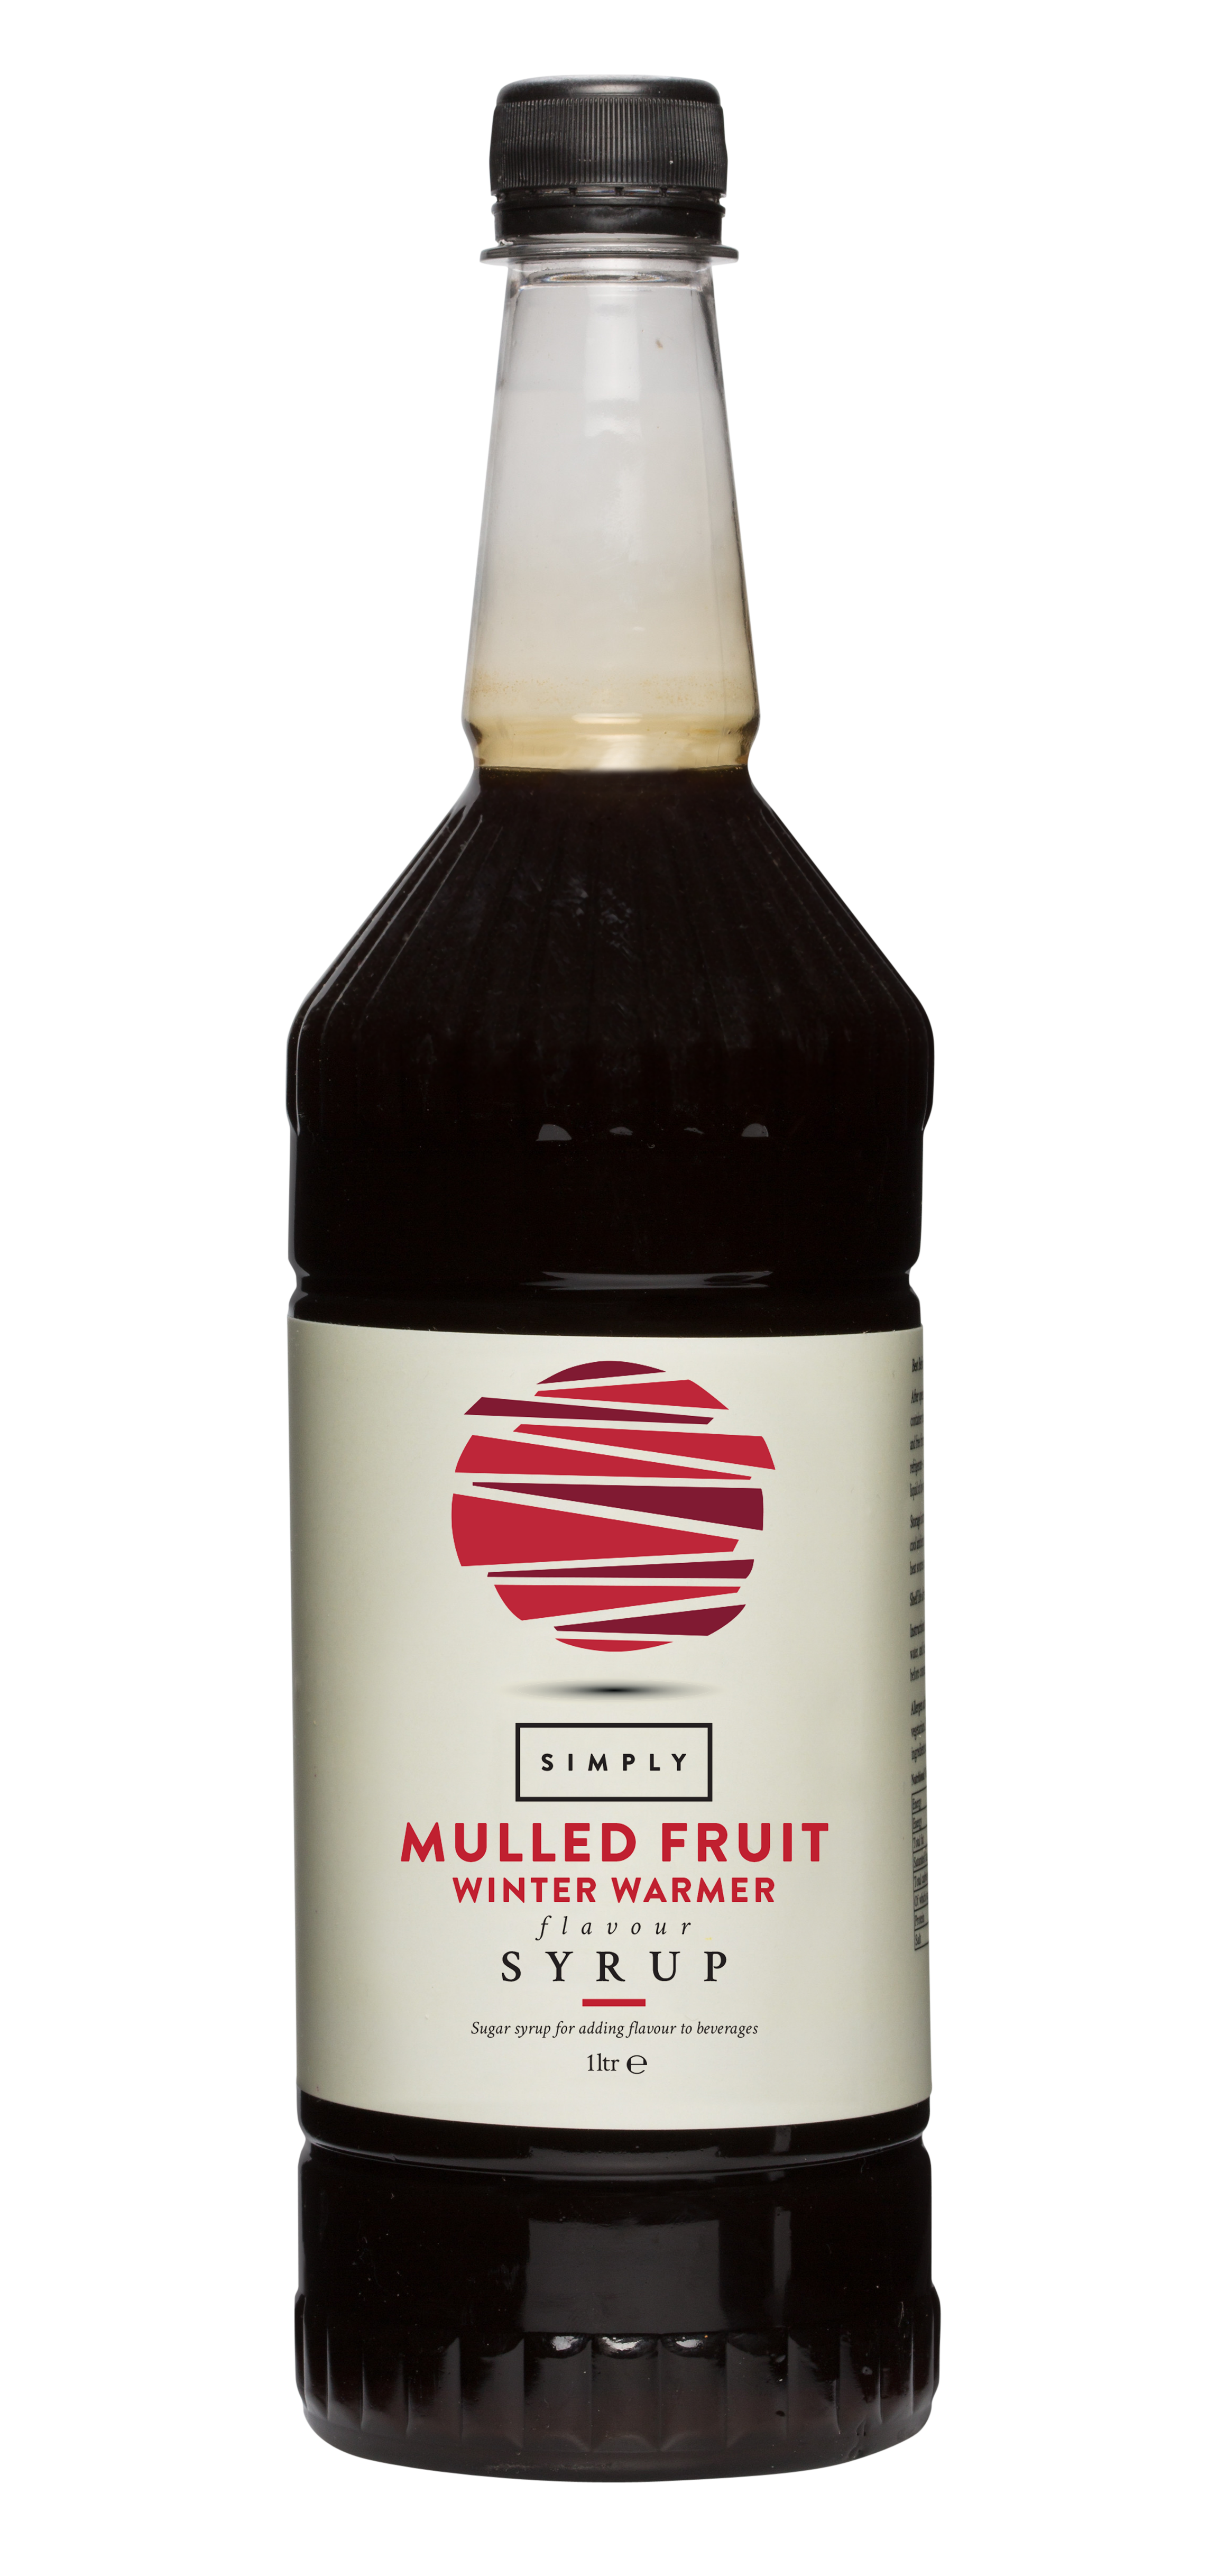 Simply Winter Warmer Syrup – Mulled Fruit